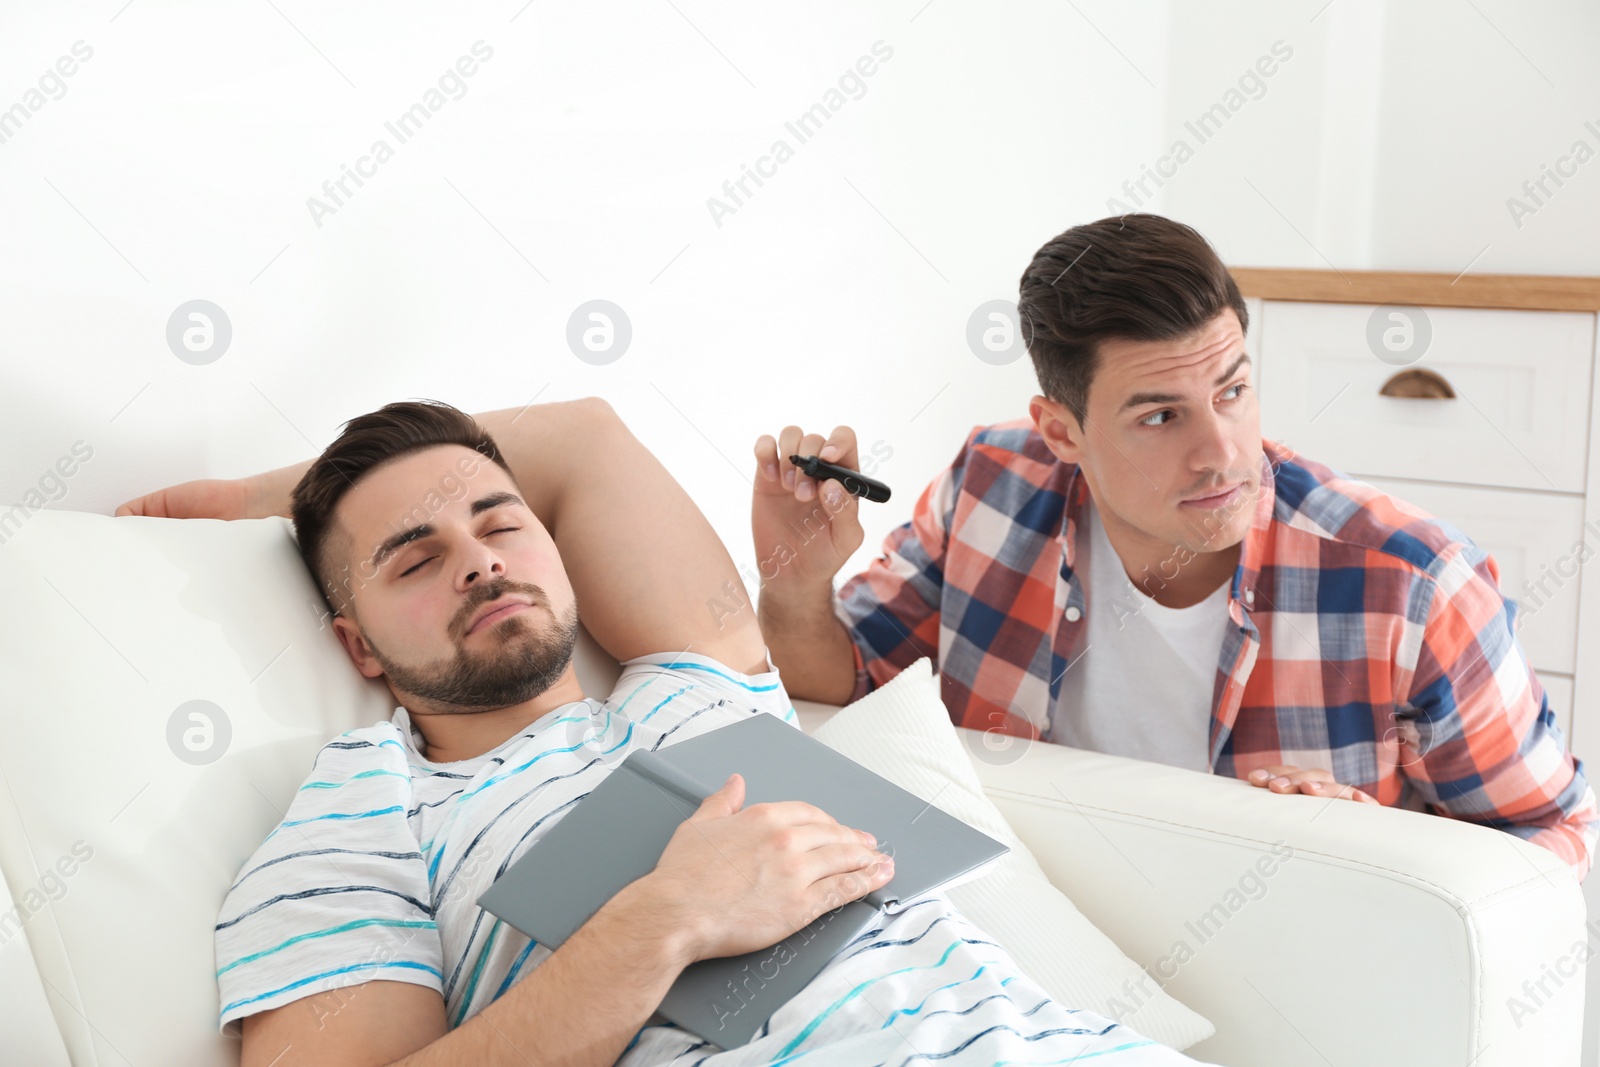 Photo of Man with marker near sleeping friend indoors. April fool's day